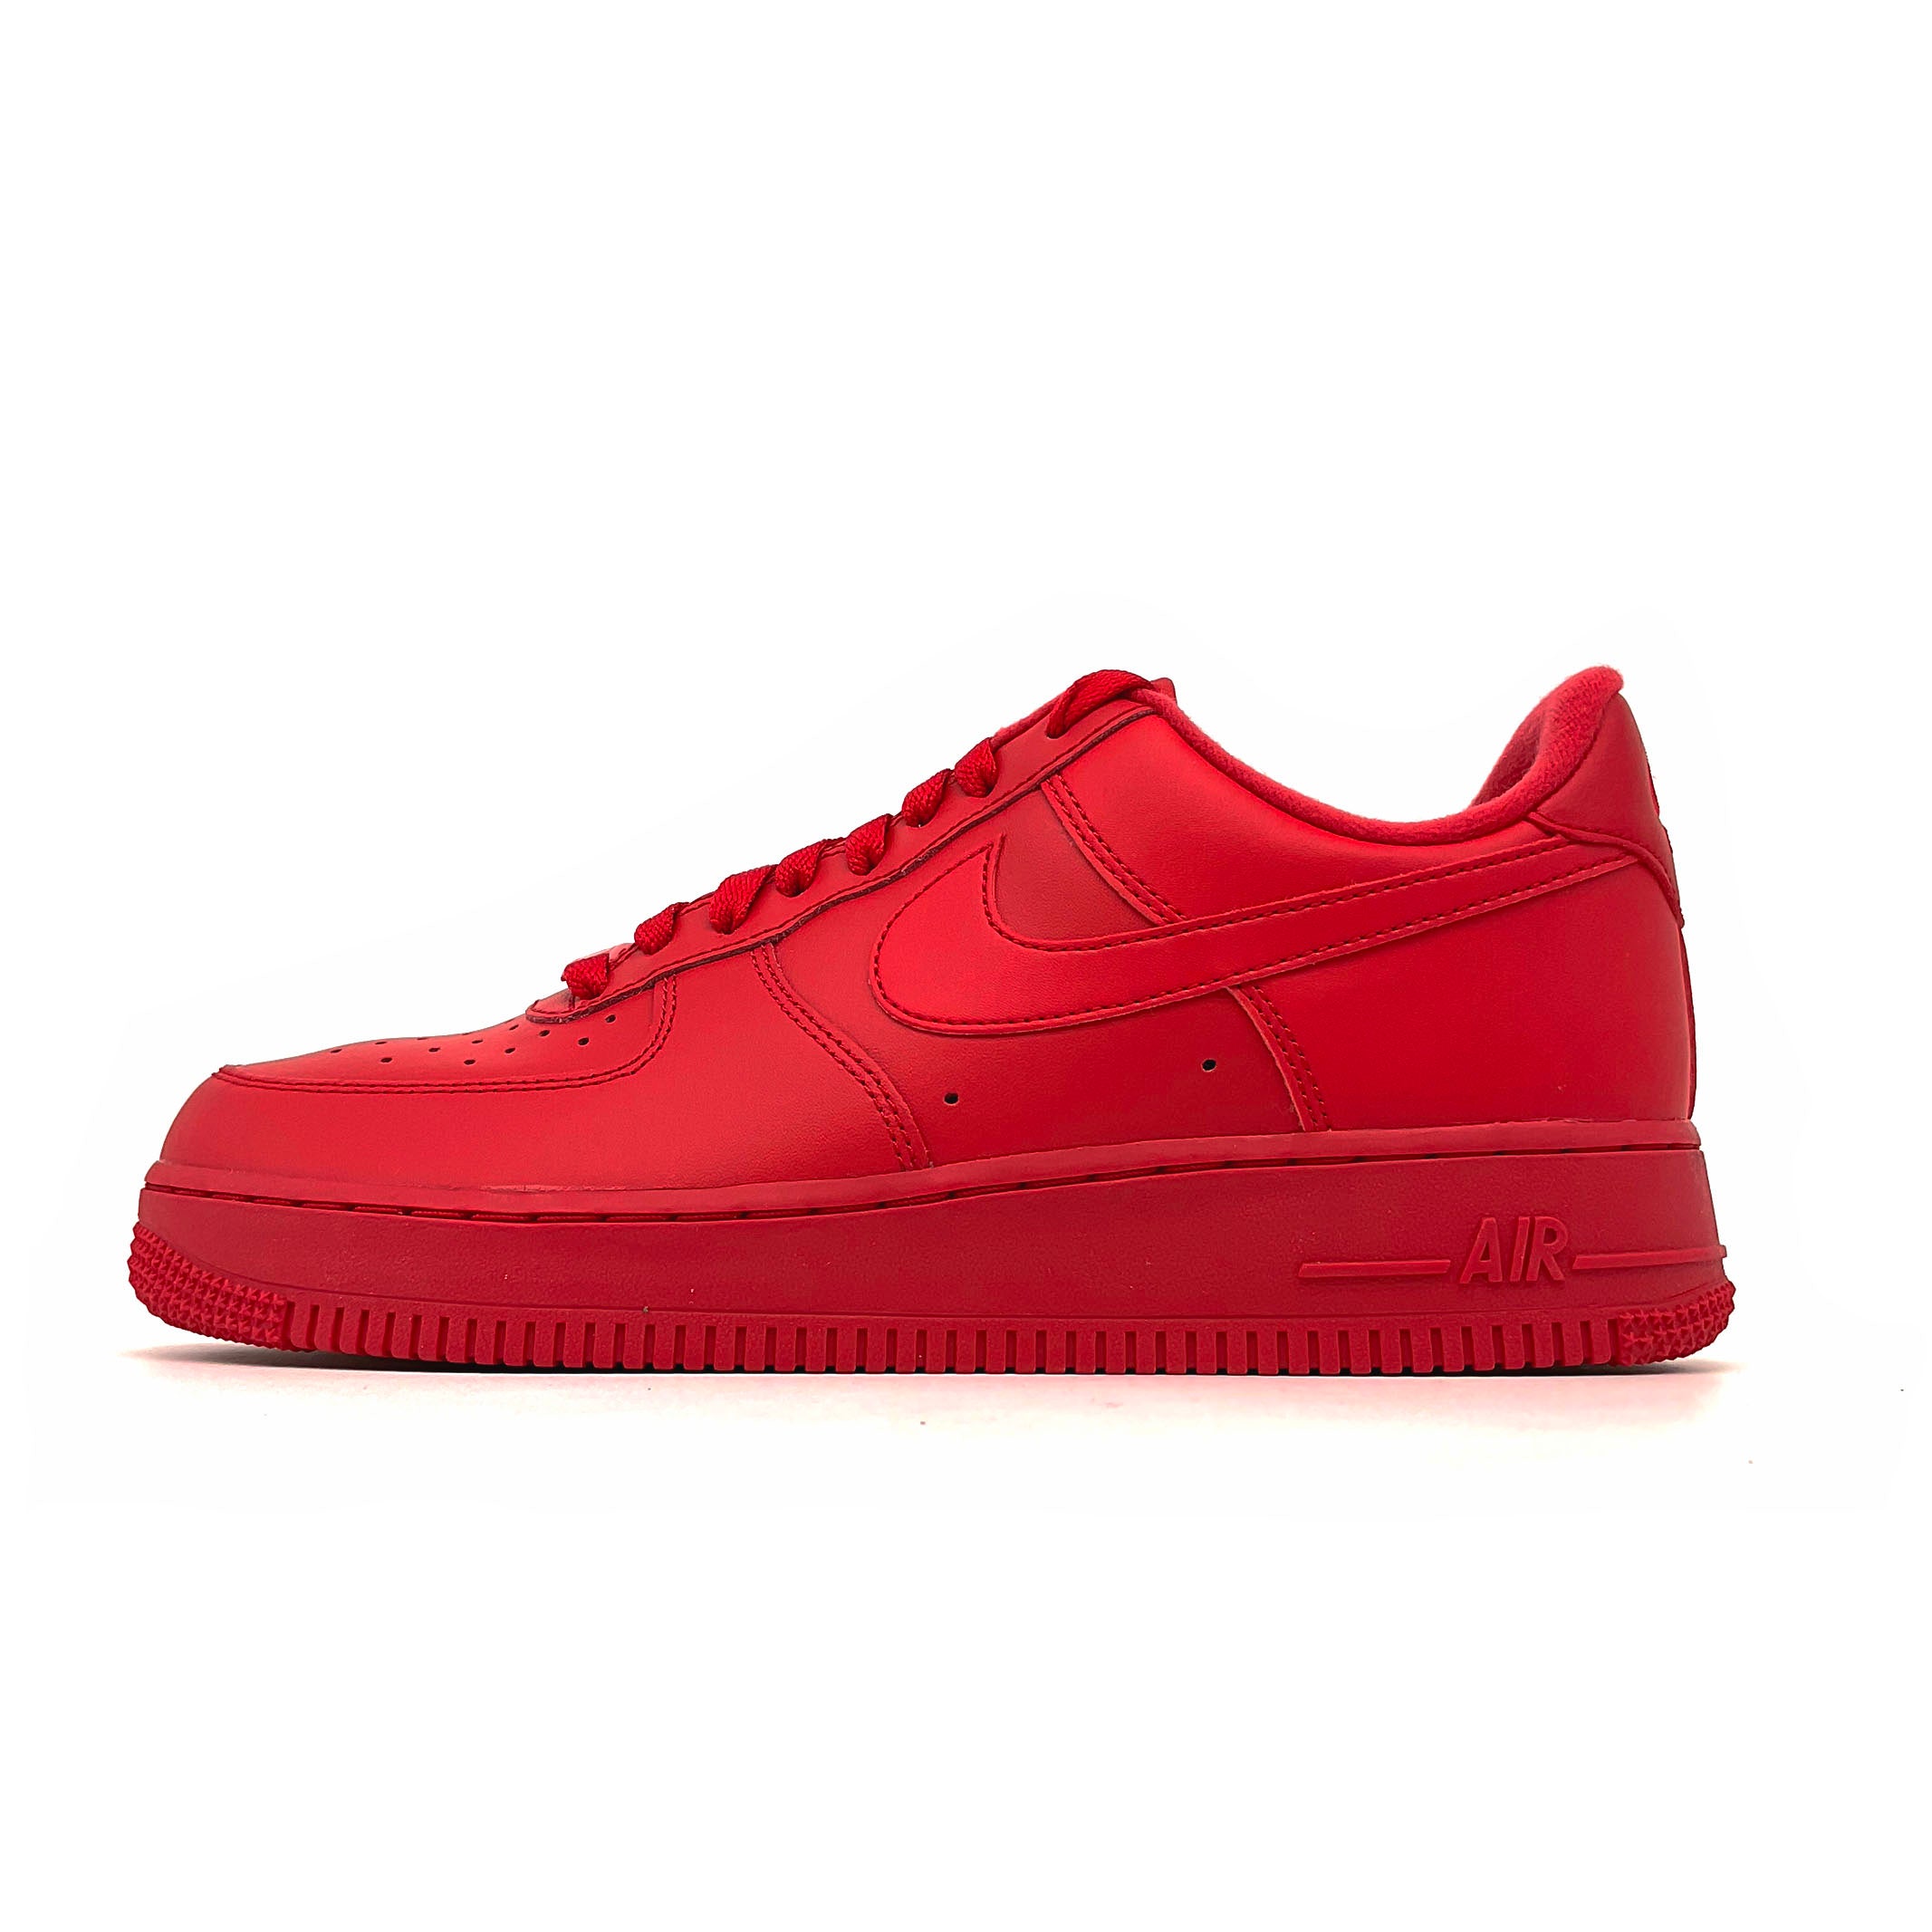 NIKE AIR FORCE 1 '07 LV8 1 “TRIPLE RED” – FOOT FIRST